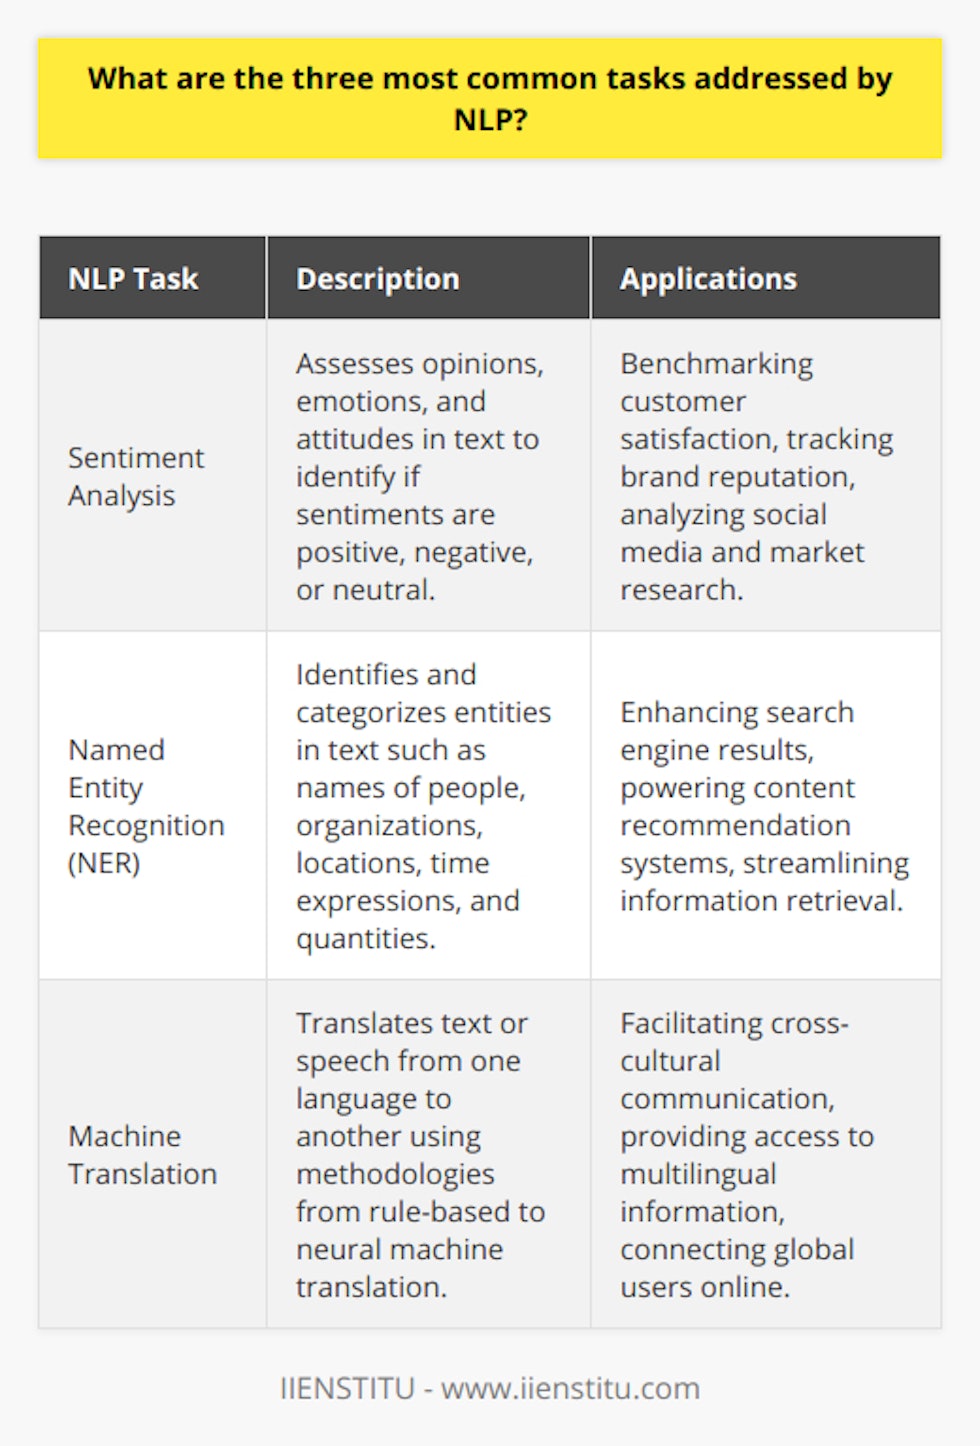 Natural Language Processing (NLP) is a subfield of artificial intelligence that bridges the gap between human language and computer understanding. Among the myriad of tasks NLP tackles, three stand out for their prevalence and impact: sentiment analysis, named entity recognition (NER), and machine translation.**Sentiment Analysis**Sentiment analysis is the computational study of people's opinions, sentiments, emotions, and attitudes within the written language. This NLP task is particularly valuable for businesses and organizations looking to gauge public opinion about products or services. By analyzing online reviews, social media conversations, and customer feedback, sentiment analysis algorithms can determine whether the expressed sentiment is positive, negative, or neutral. This automated process allows for real-time sentiment tracking across vast datasets, providing actionable insights and helping businesses to proactively respond to customer satisfaction or public relations challenges.**Named Entity Recognition**NER is a critical task in NLP that involves automatically identifying and categorizing key information in text, such as the names of people, organizations, locations, and sometimes even time expressions or quantities. This task enables the extraction of structured information from unstructured text, making it easier for machines to understand and respond to human inquiries. For instance, when a user asks a digital assistant for the latest news about a particular company, NER systems can quickly scour news articles to highlight relevant information pertaining to that company. Consequently, NER has significant applications across various fields including search engines, content recommendation systems, and information retrieval platforms.**Machine Translation**Lastly, machine translation has become one of the most commonly known NLP tasks thanks to the globalization of the internet. It involves the automatic translation of text or speech from one language to another. Machine translation engines have come a long way from rule-based systems to statistical methods, and now to neural machine translation (NMT), which uses deep learning models to produce more accurate and contextually relevant translations. While it is not without its challenges, such as capturing cultural nuances and idiomatic expressions, improved machine translation facilitates international communication, broadens access to information, and connects users across linguistic barriers in ways previously unimaginable.As we continue to evolve and refine these tasks, Natural Language Processing becomes increasingly sophisticated and intertwined with our daily activities. Sentiment analysis, named entity recognition, and machine translation are three pivotal tasks of NLP that hold the key to realizing many of the promises of a future where human language and machine intelligence converge seamlessly.